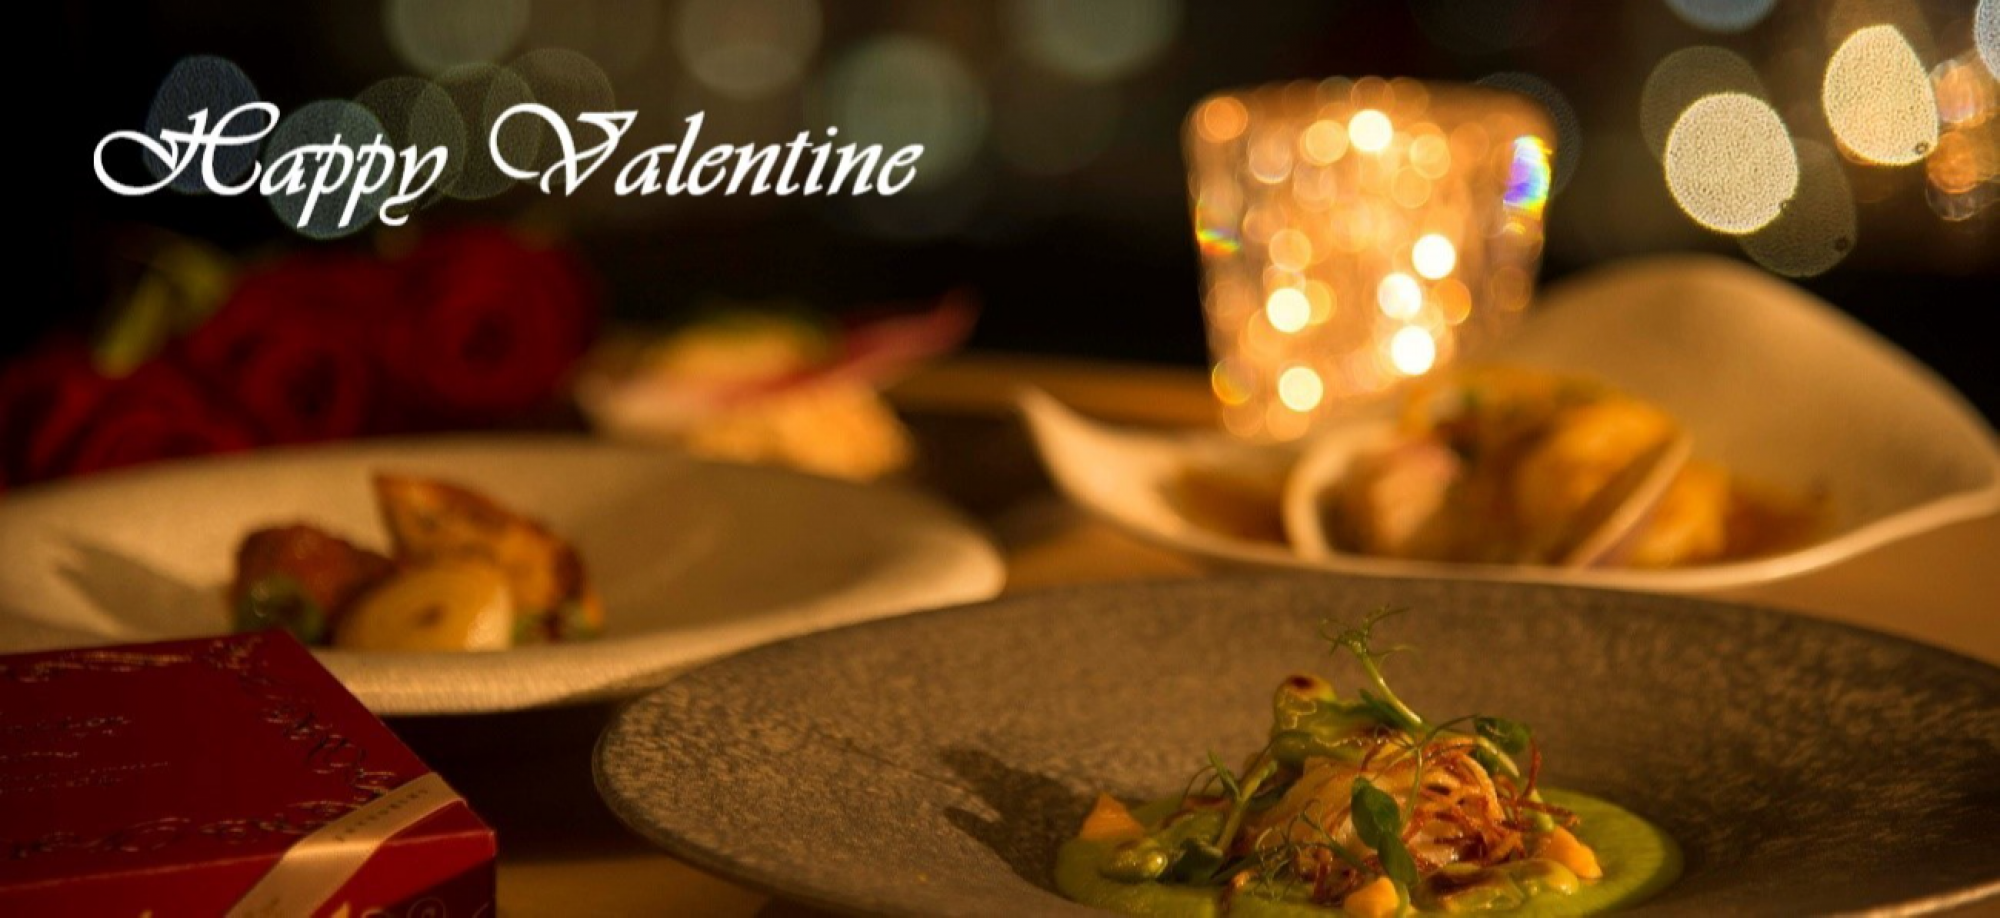 Happy Valentine　　One red rose for Valentine’s is our gift to you. A delectable Italian Valentine special dinner at the Rooftop Bar